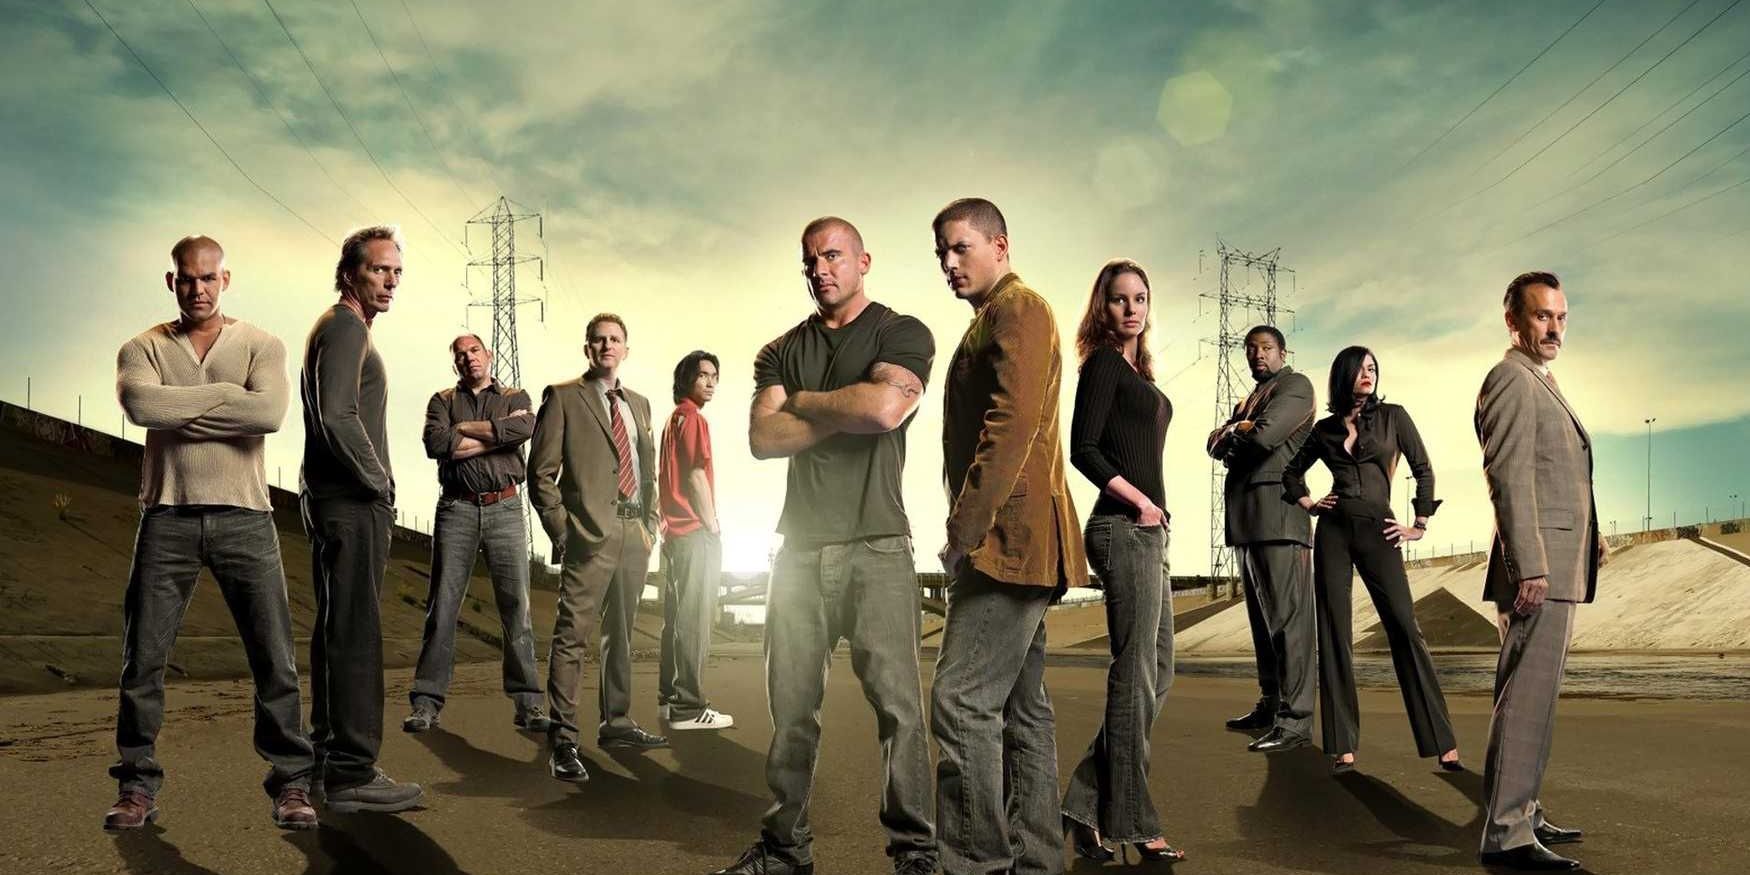 Prison Break Ranking The Five Best And Five Worst Episodes (According To IMDb)